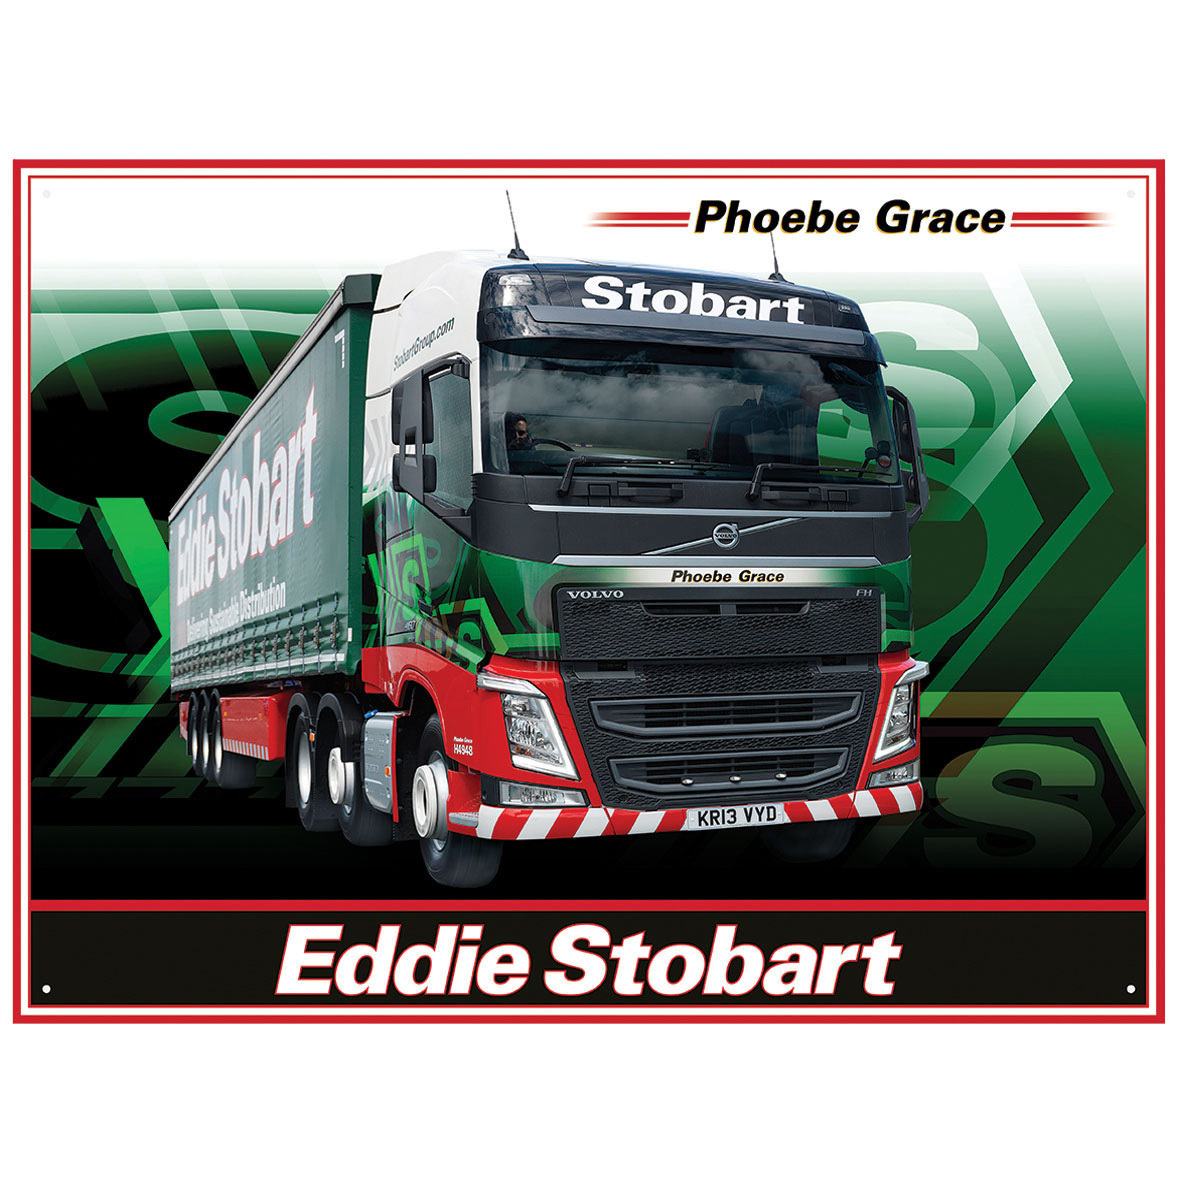 Eddie Stobart Phoebe Grace Metal Wall Sign Plaque Mens Gift 300x410mm 50074 